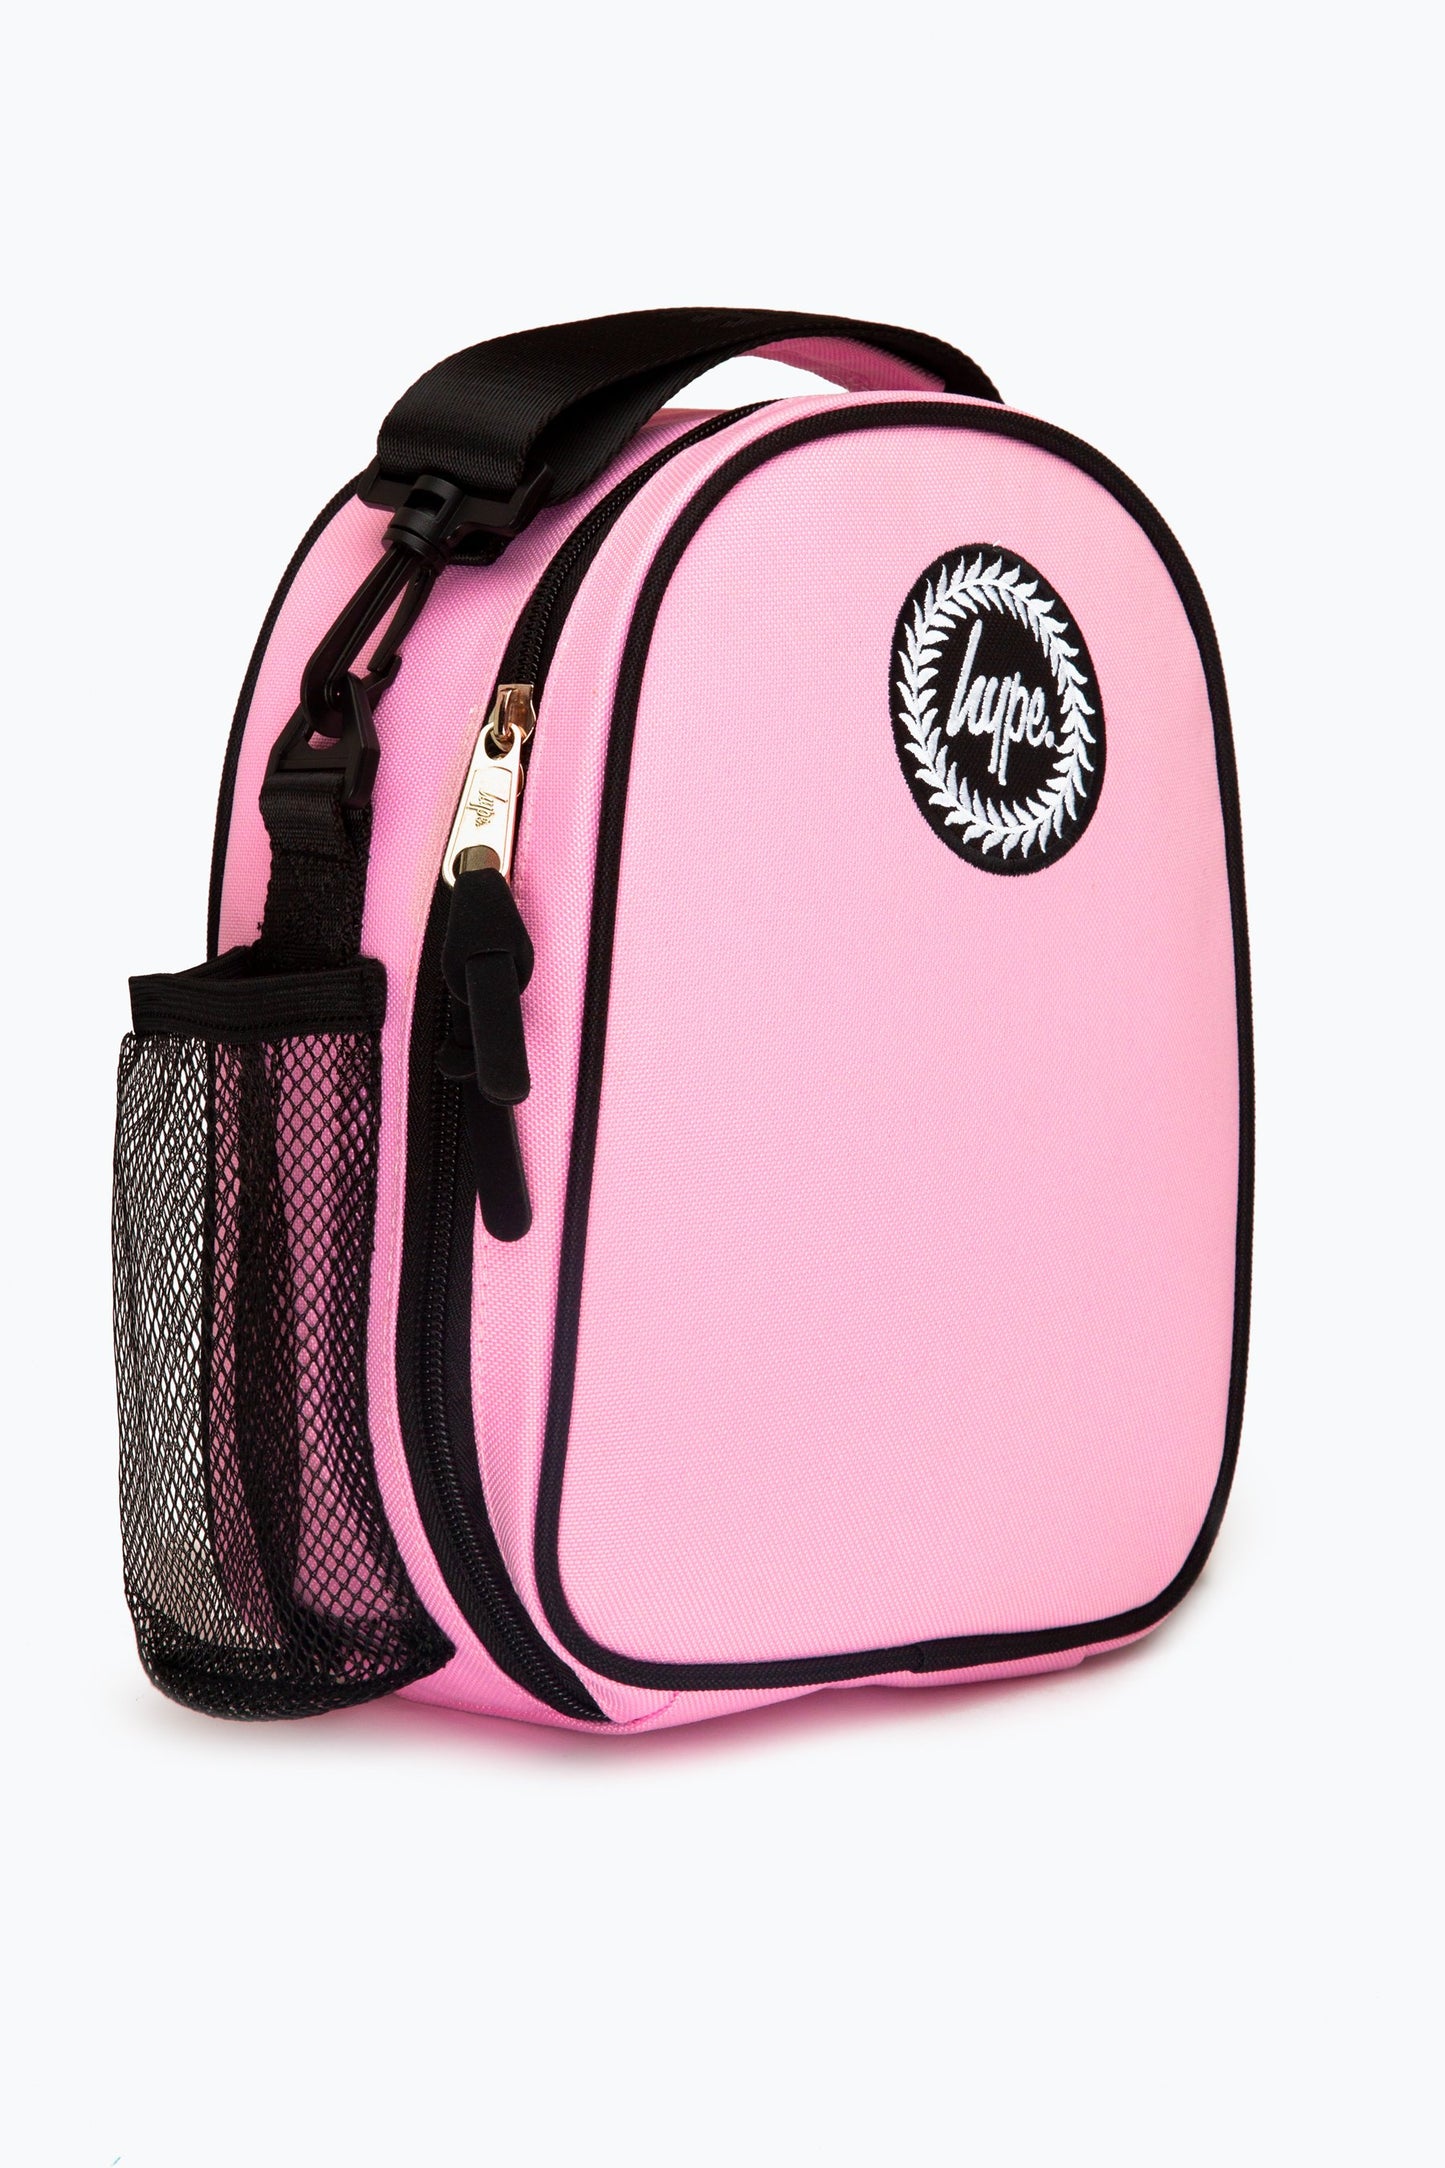 HYPE PINK MAXI LUNCH BAG